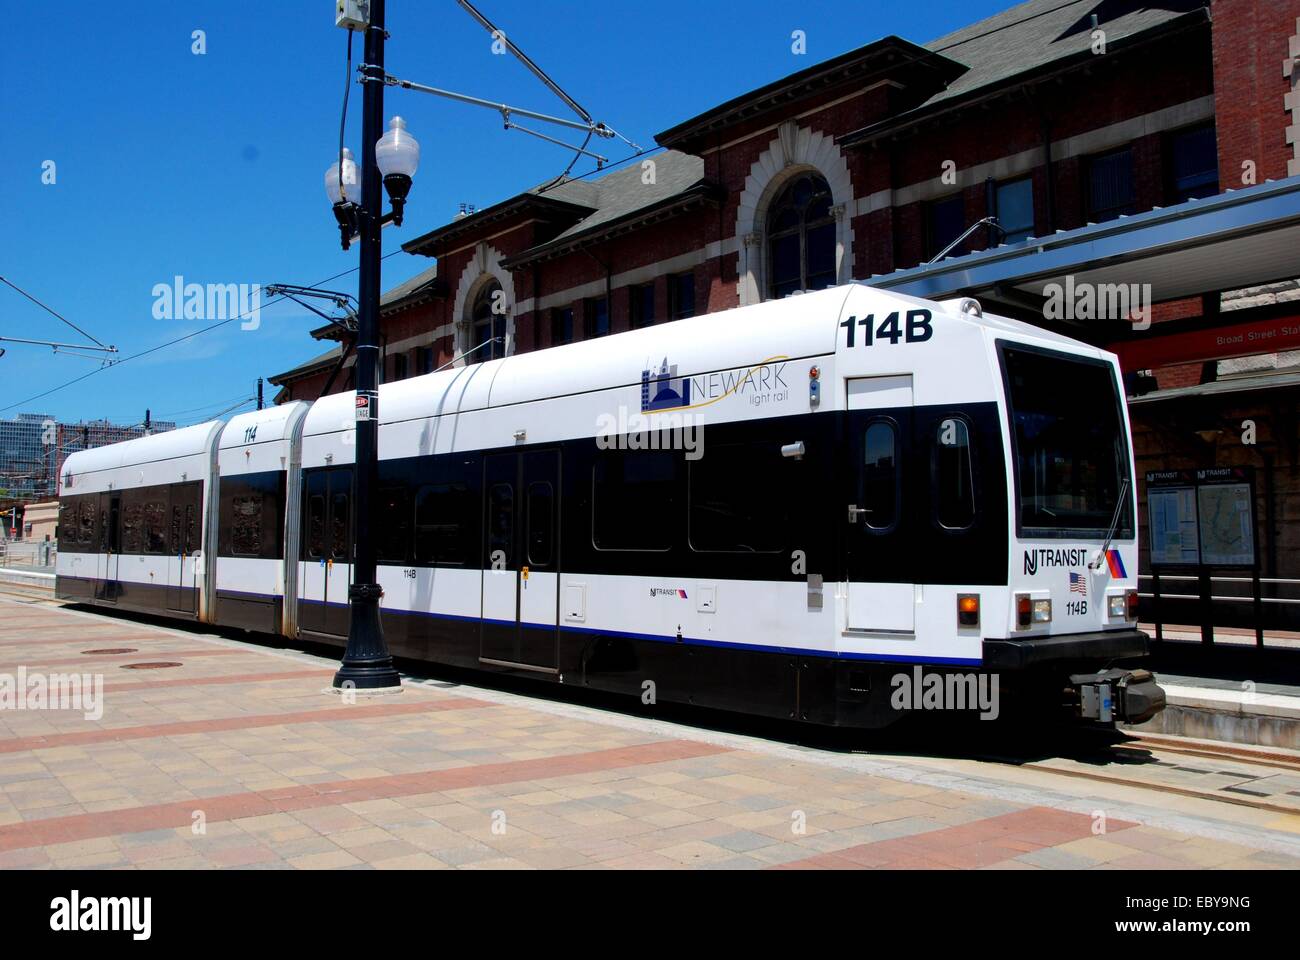 NEWARK, NEW JERSEY: One of the new light rail trains stopped at the NJ Transit Broad Street Station Stock Photo